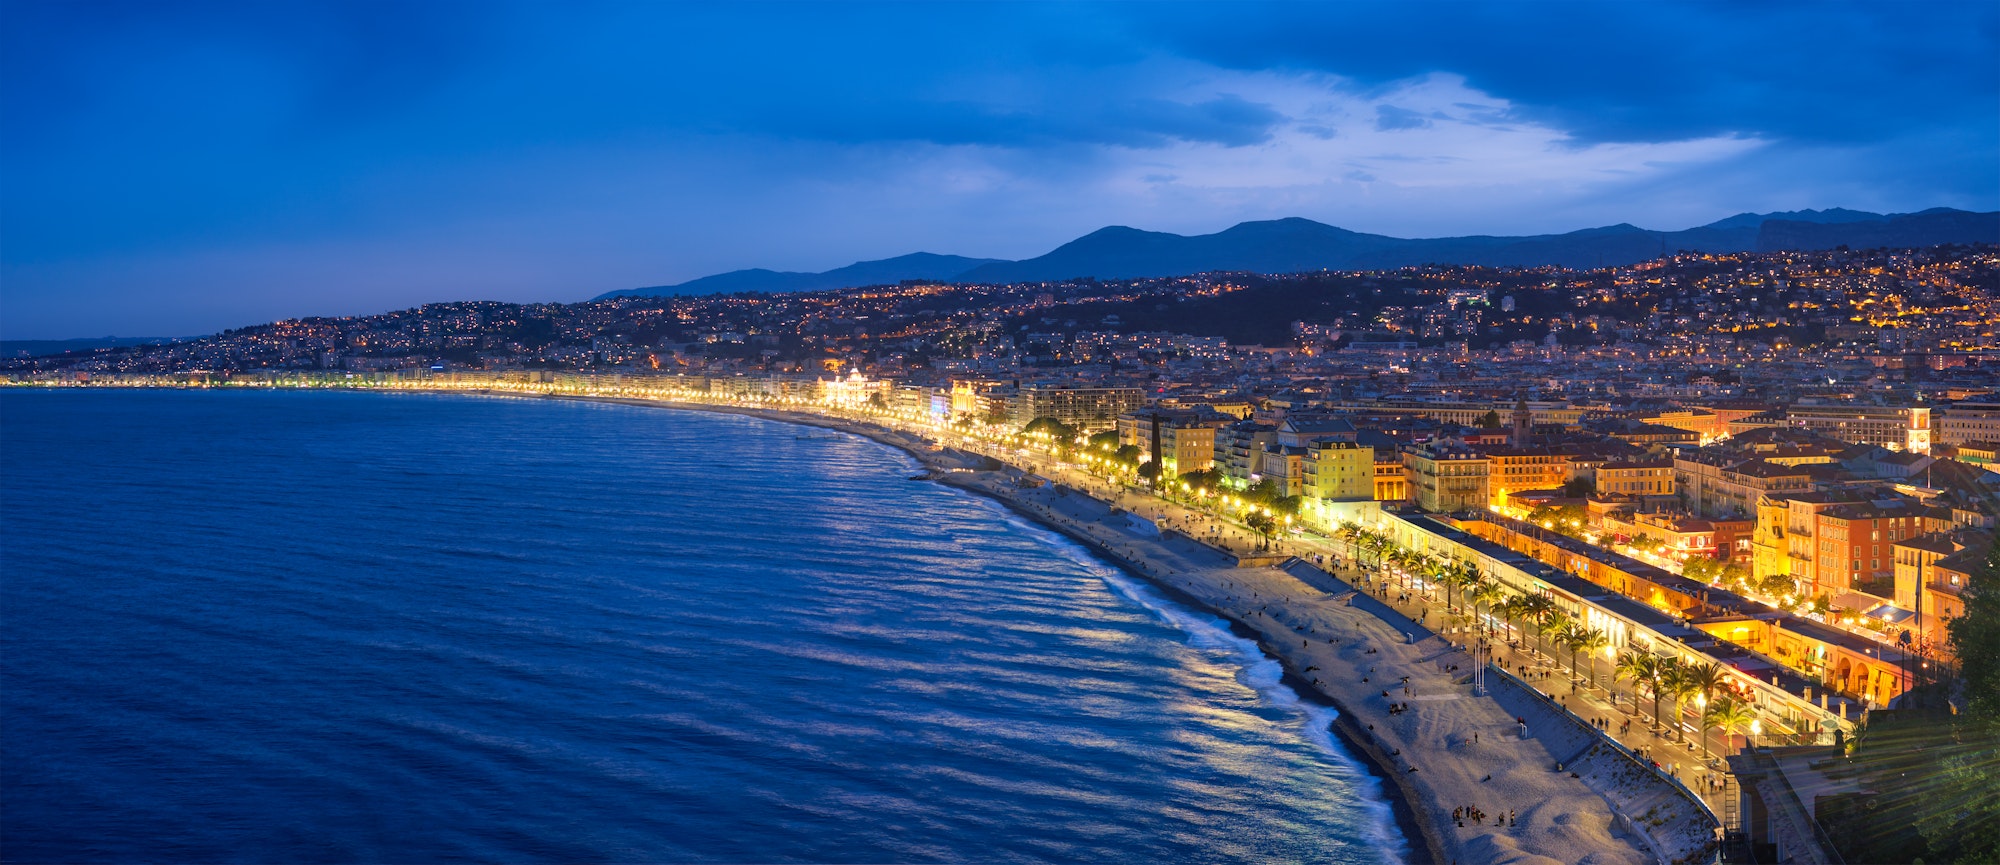 Picturesque view of Nice, France in the evening